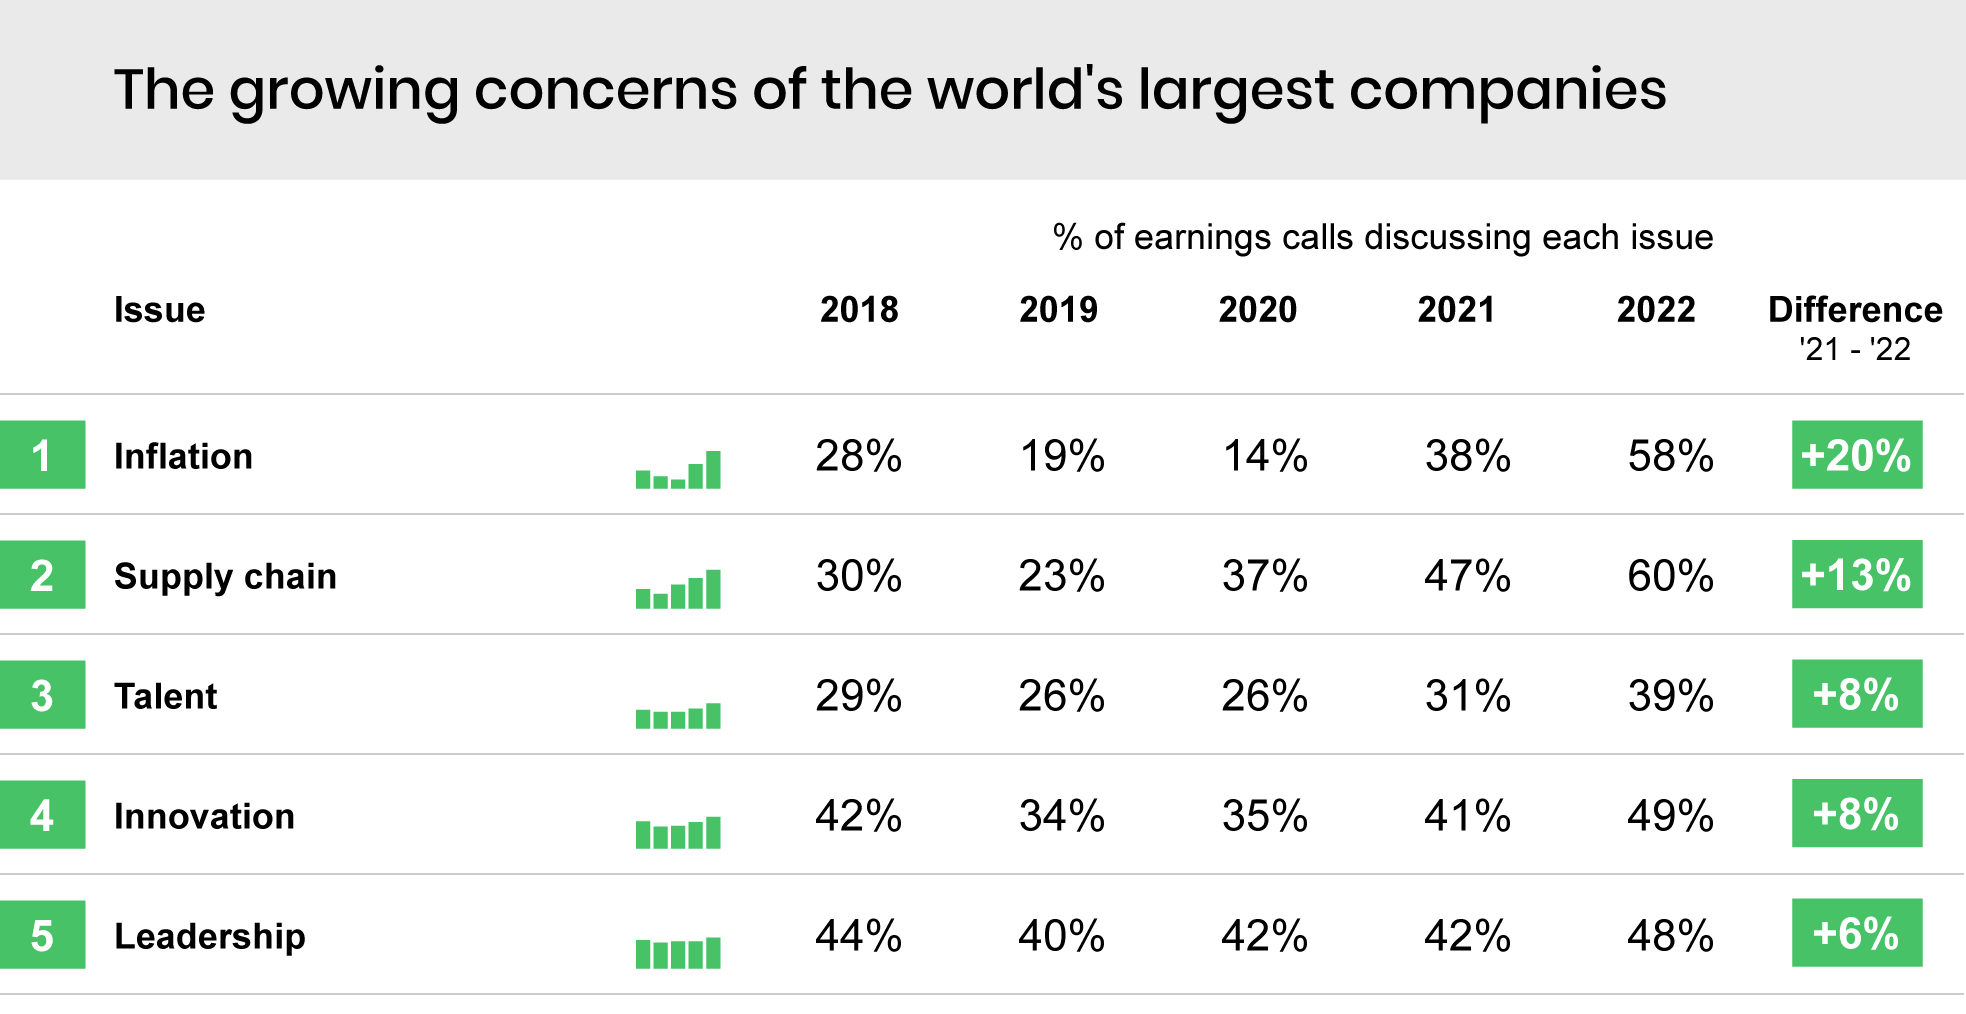 The growing concerns of the world's largest companies